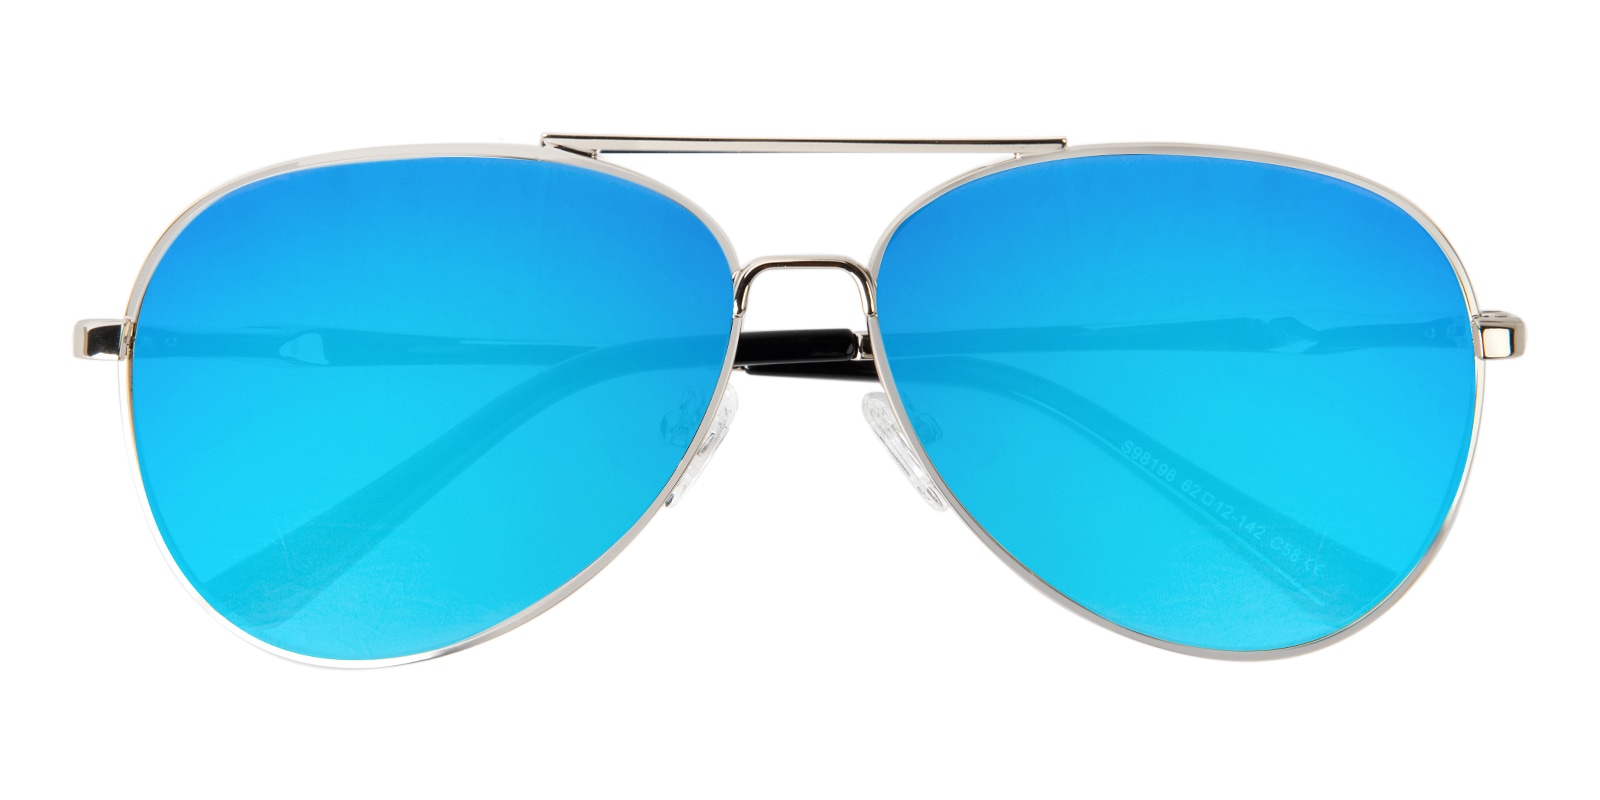 6 Mirrored Sunglasses Benefits You Should Consider – Kraywoods